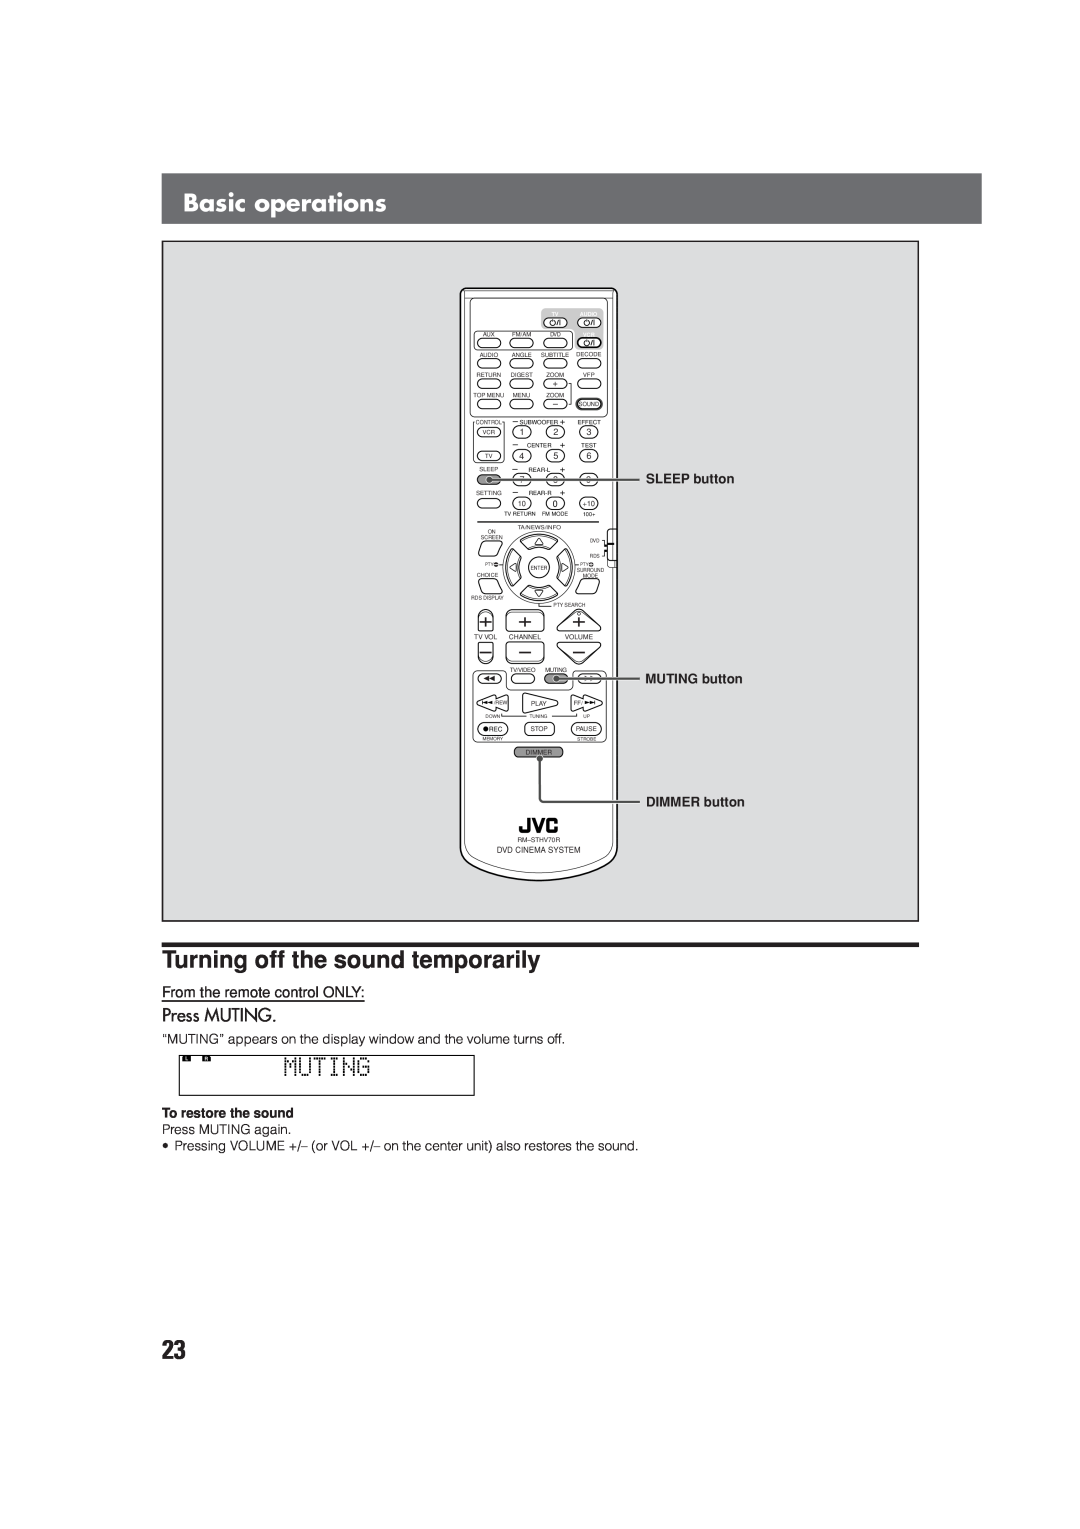 JVC LVT0865-004A, SP-XCV70 Basic operations, Turning off the sound temporarily, Press MUTING, From the remote control ONLY 